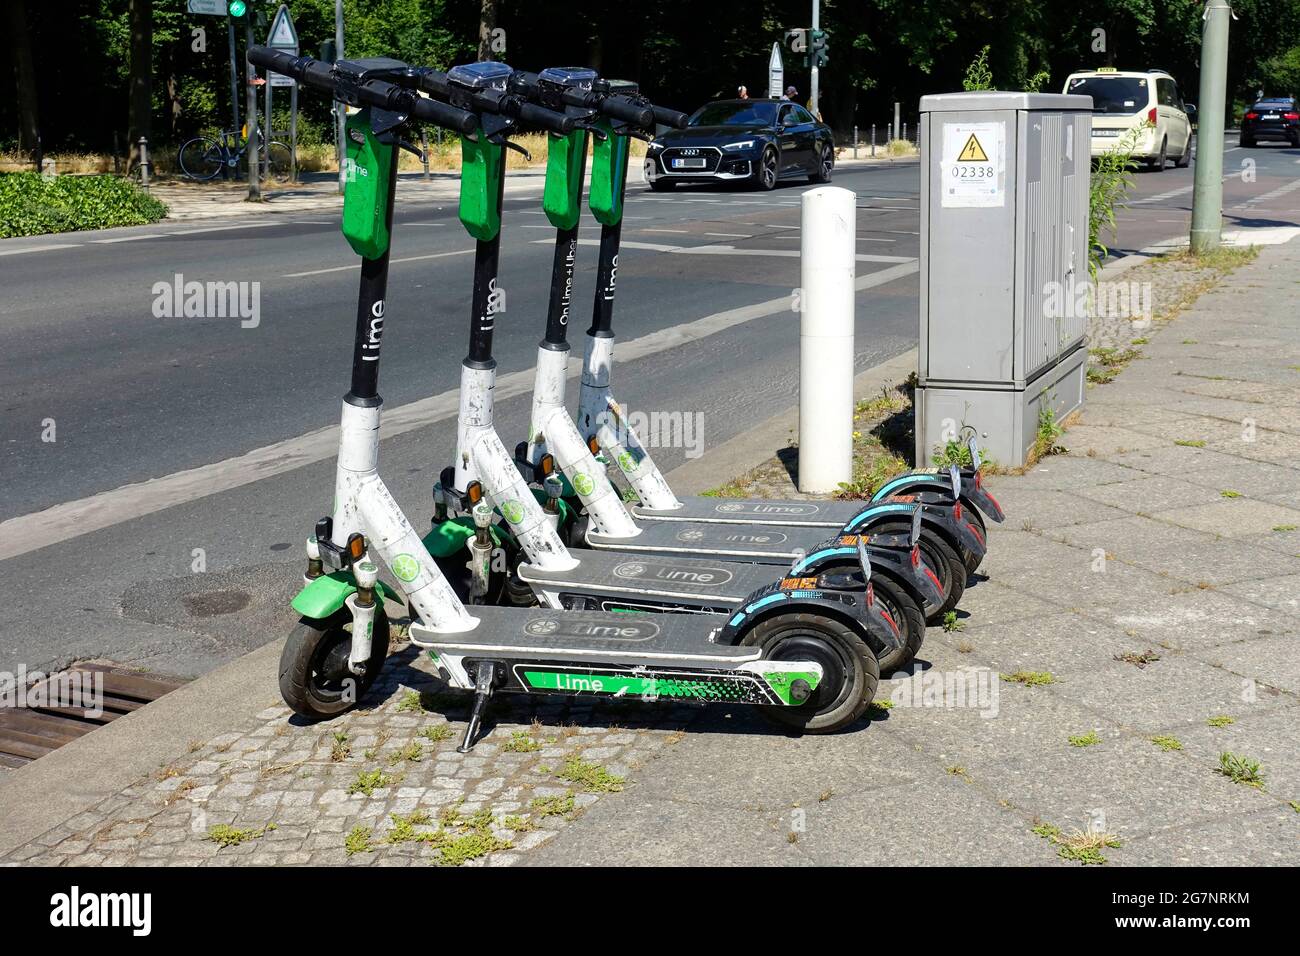 E-scooter of Lime in Berlin Stock Photo - Alamy